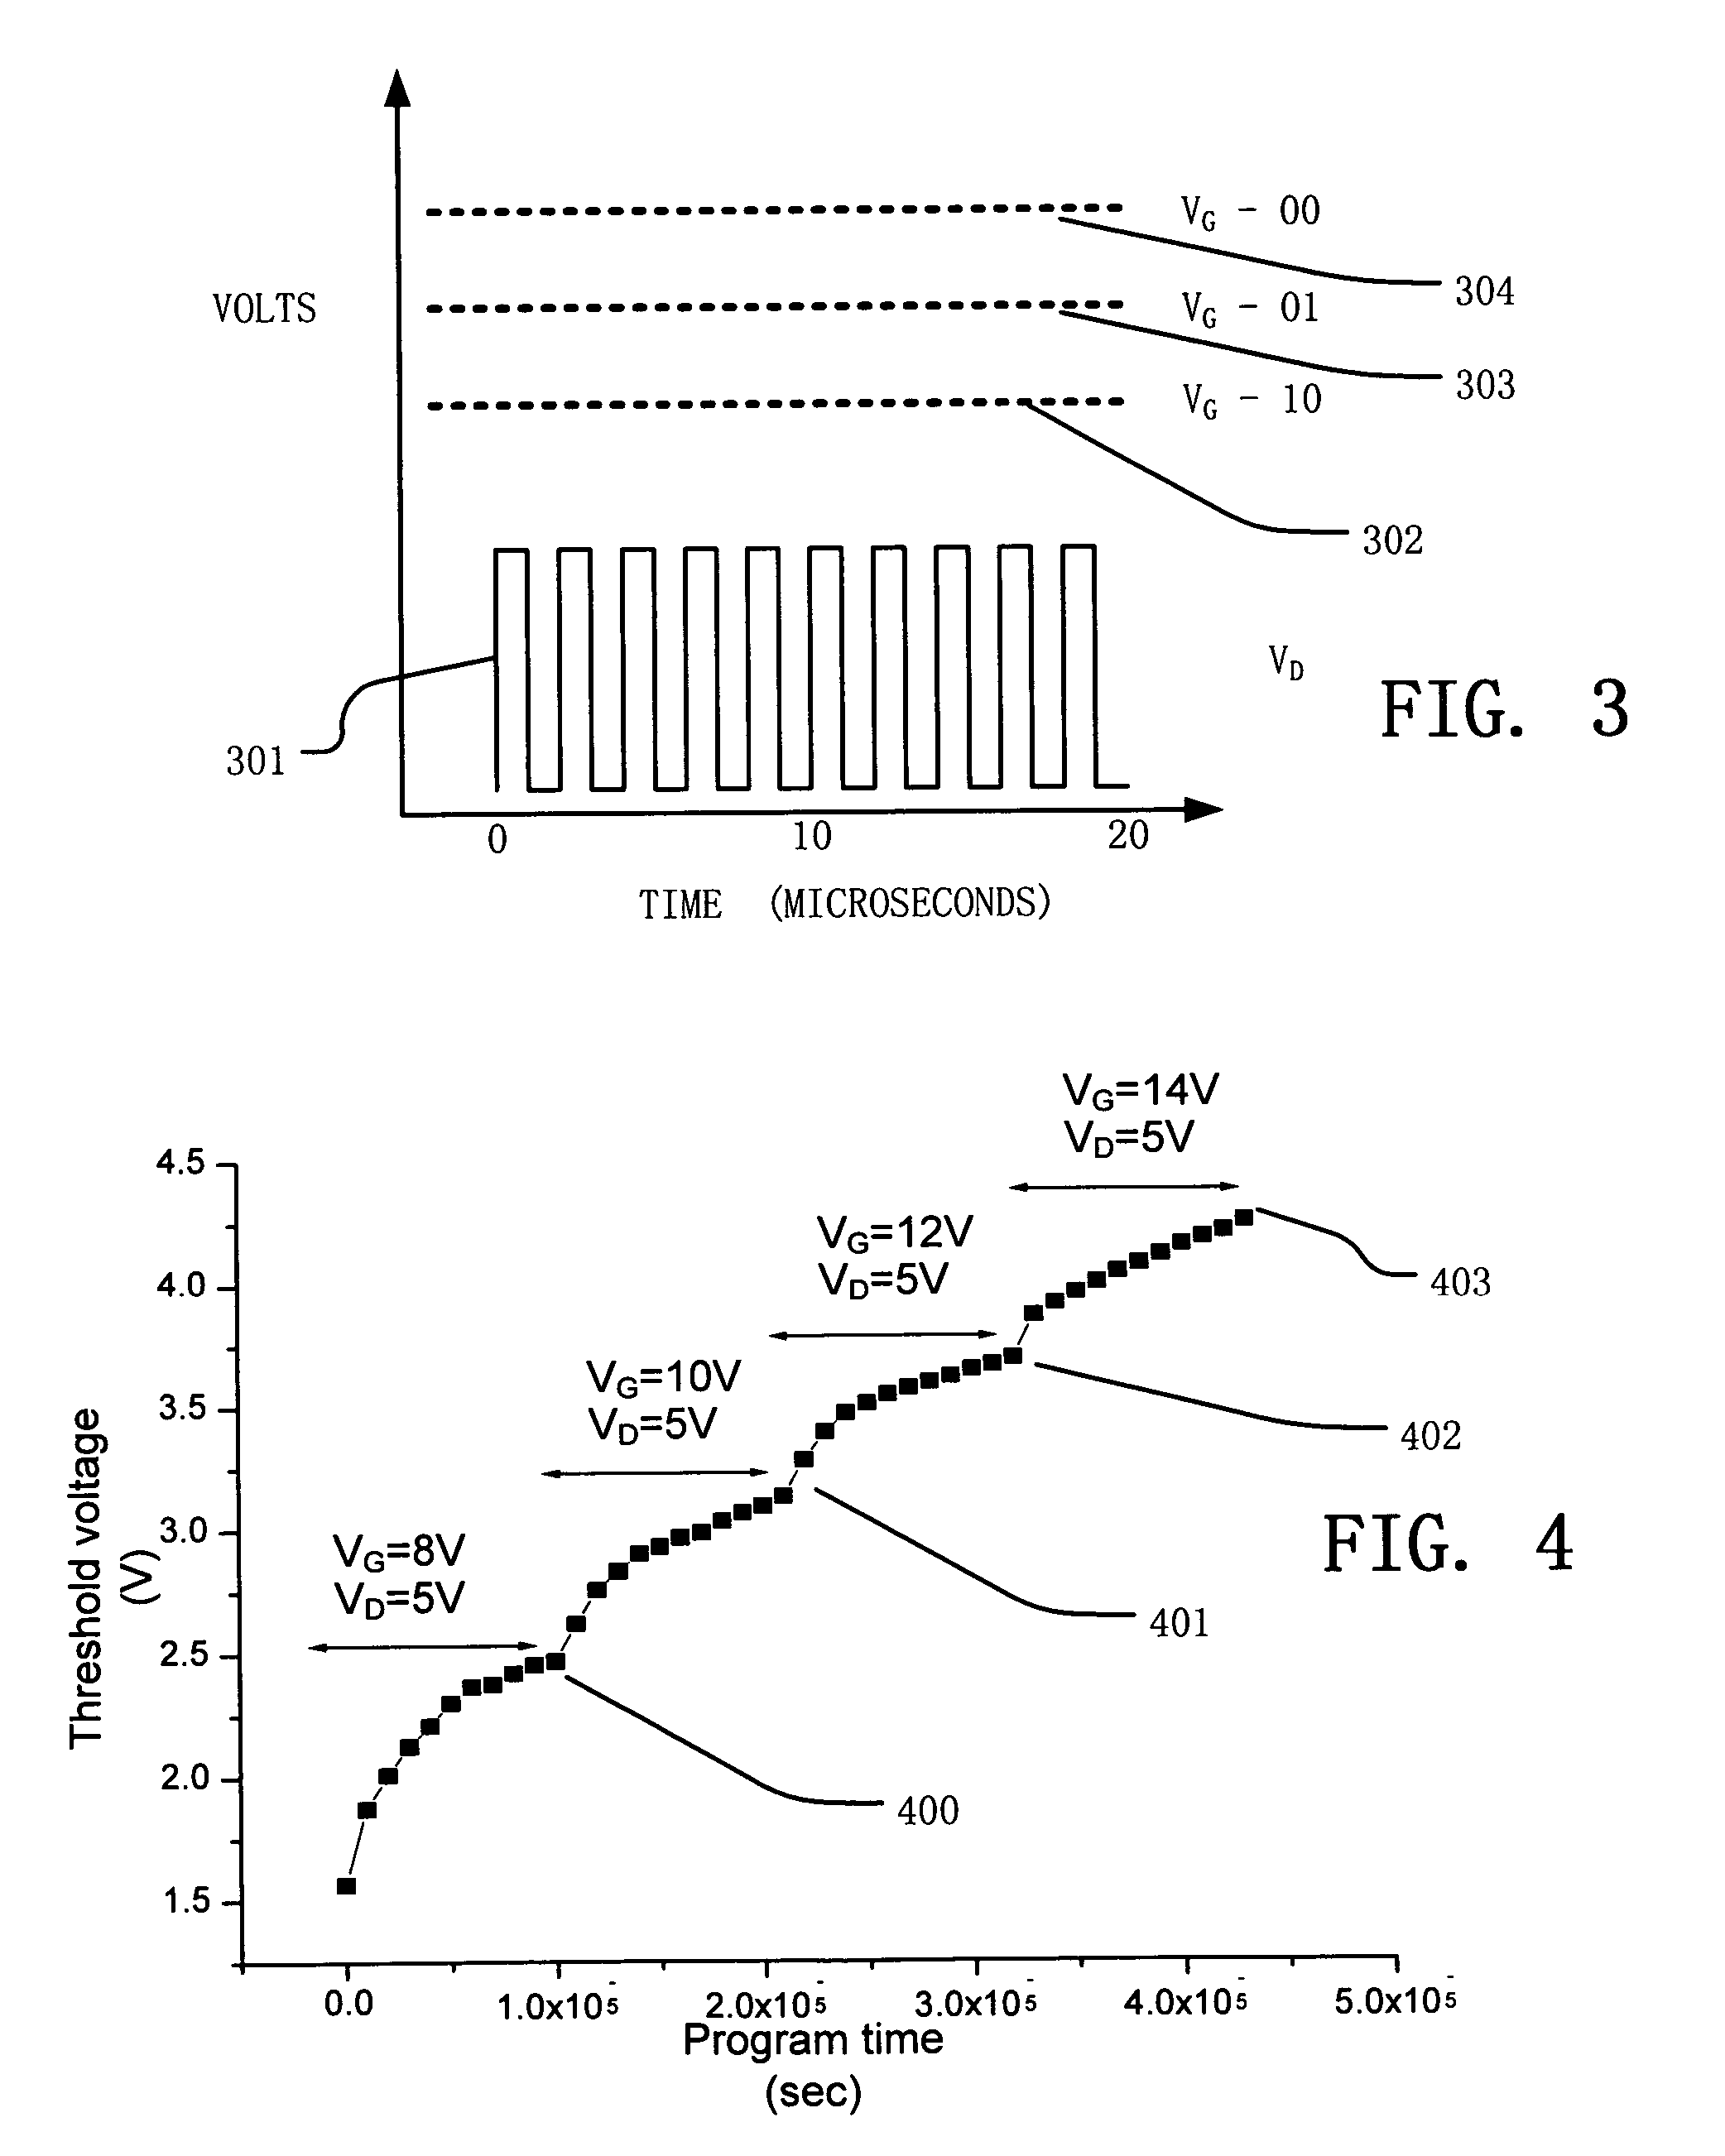 Operation scheme for programming charge trapping non-volatile memory